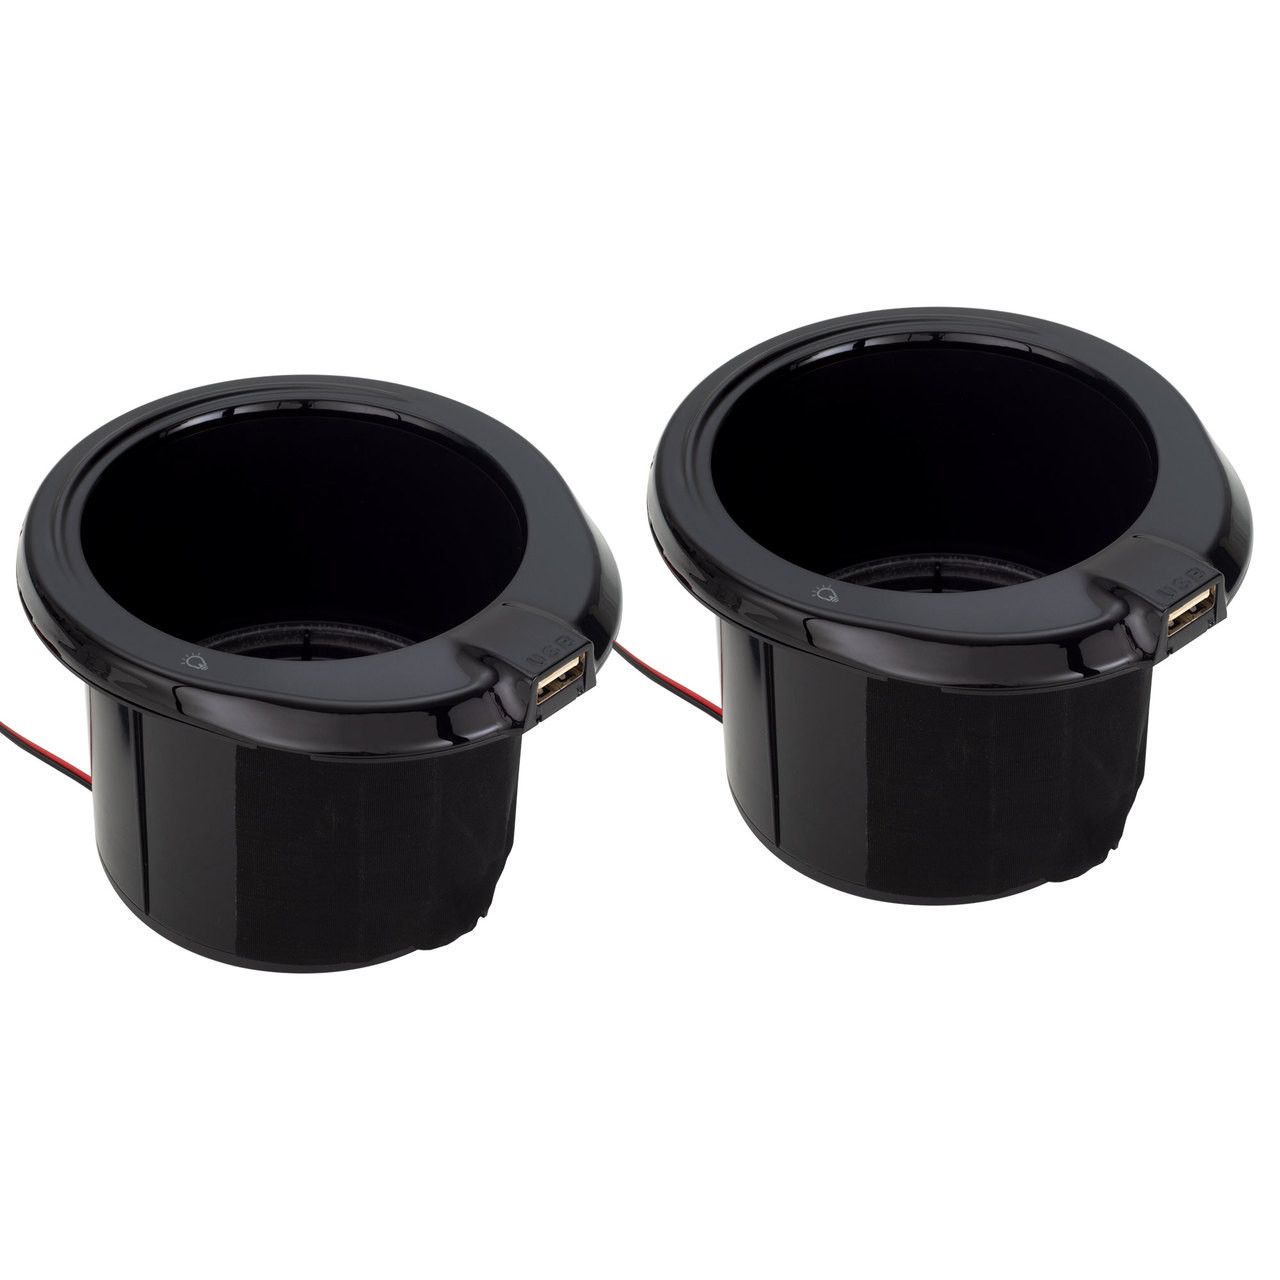 Additional Cup Holders (Set of 2) for Cruiser